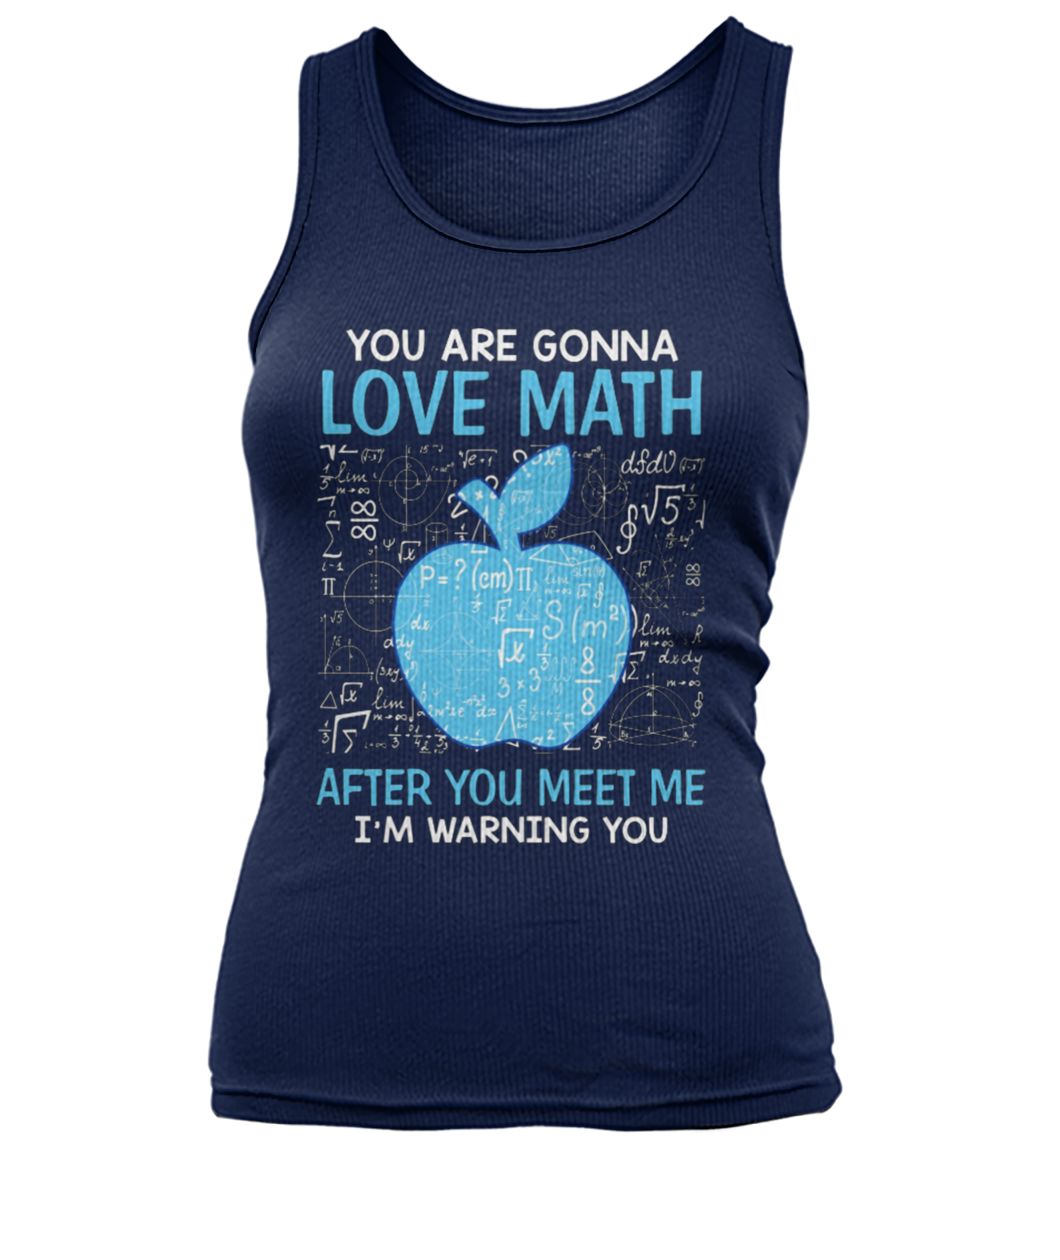 You are gonna love math after you meet me I'm warning you women's tank top